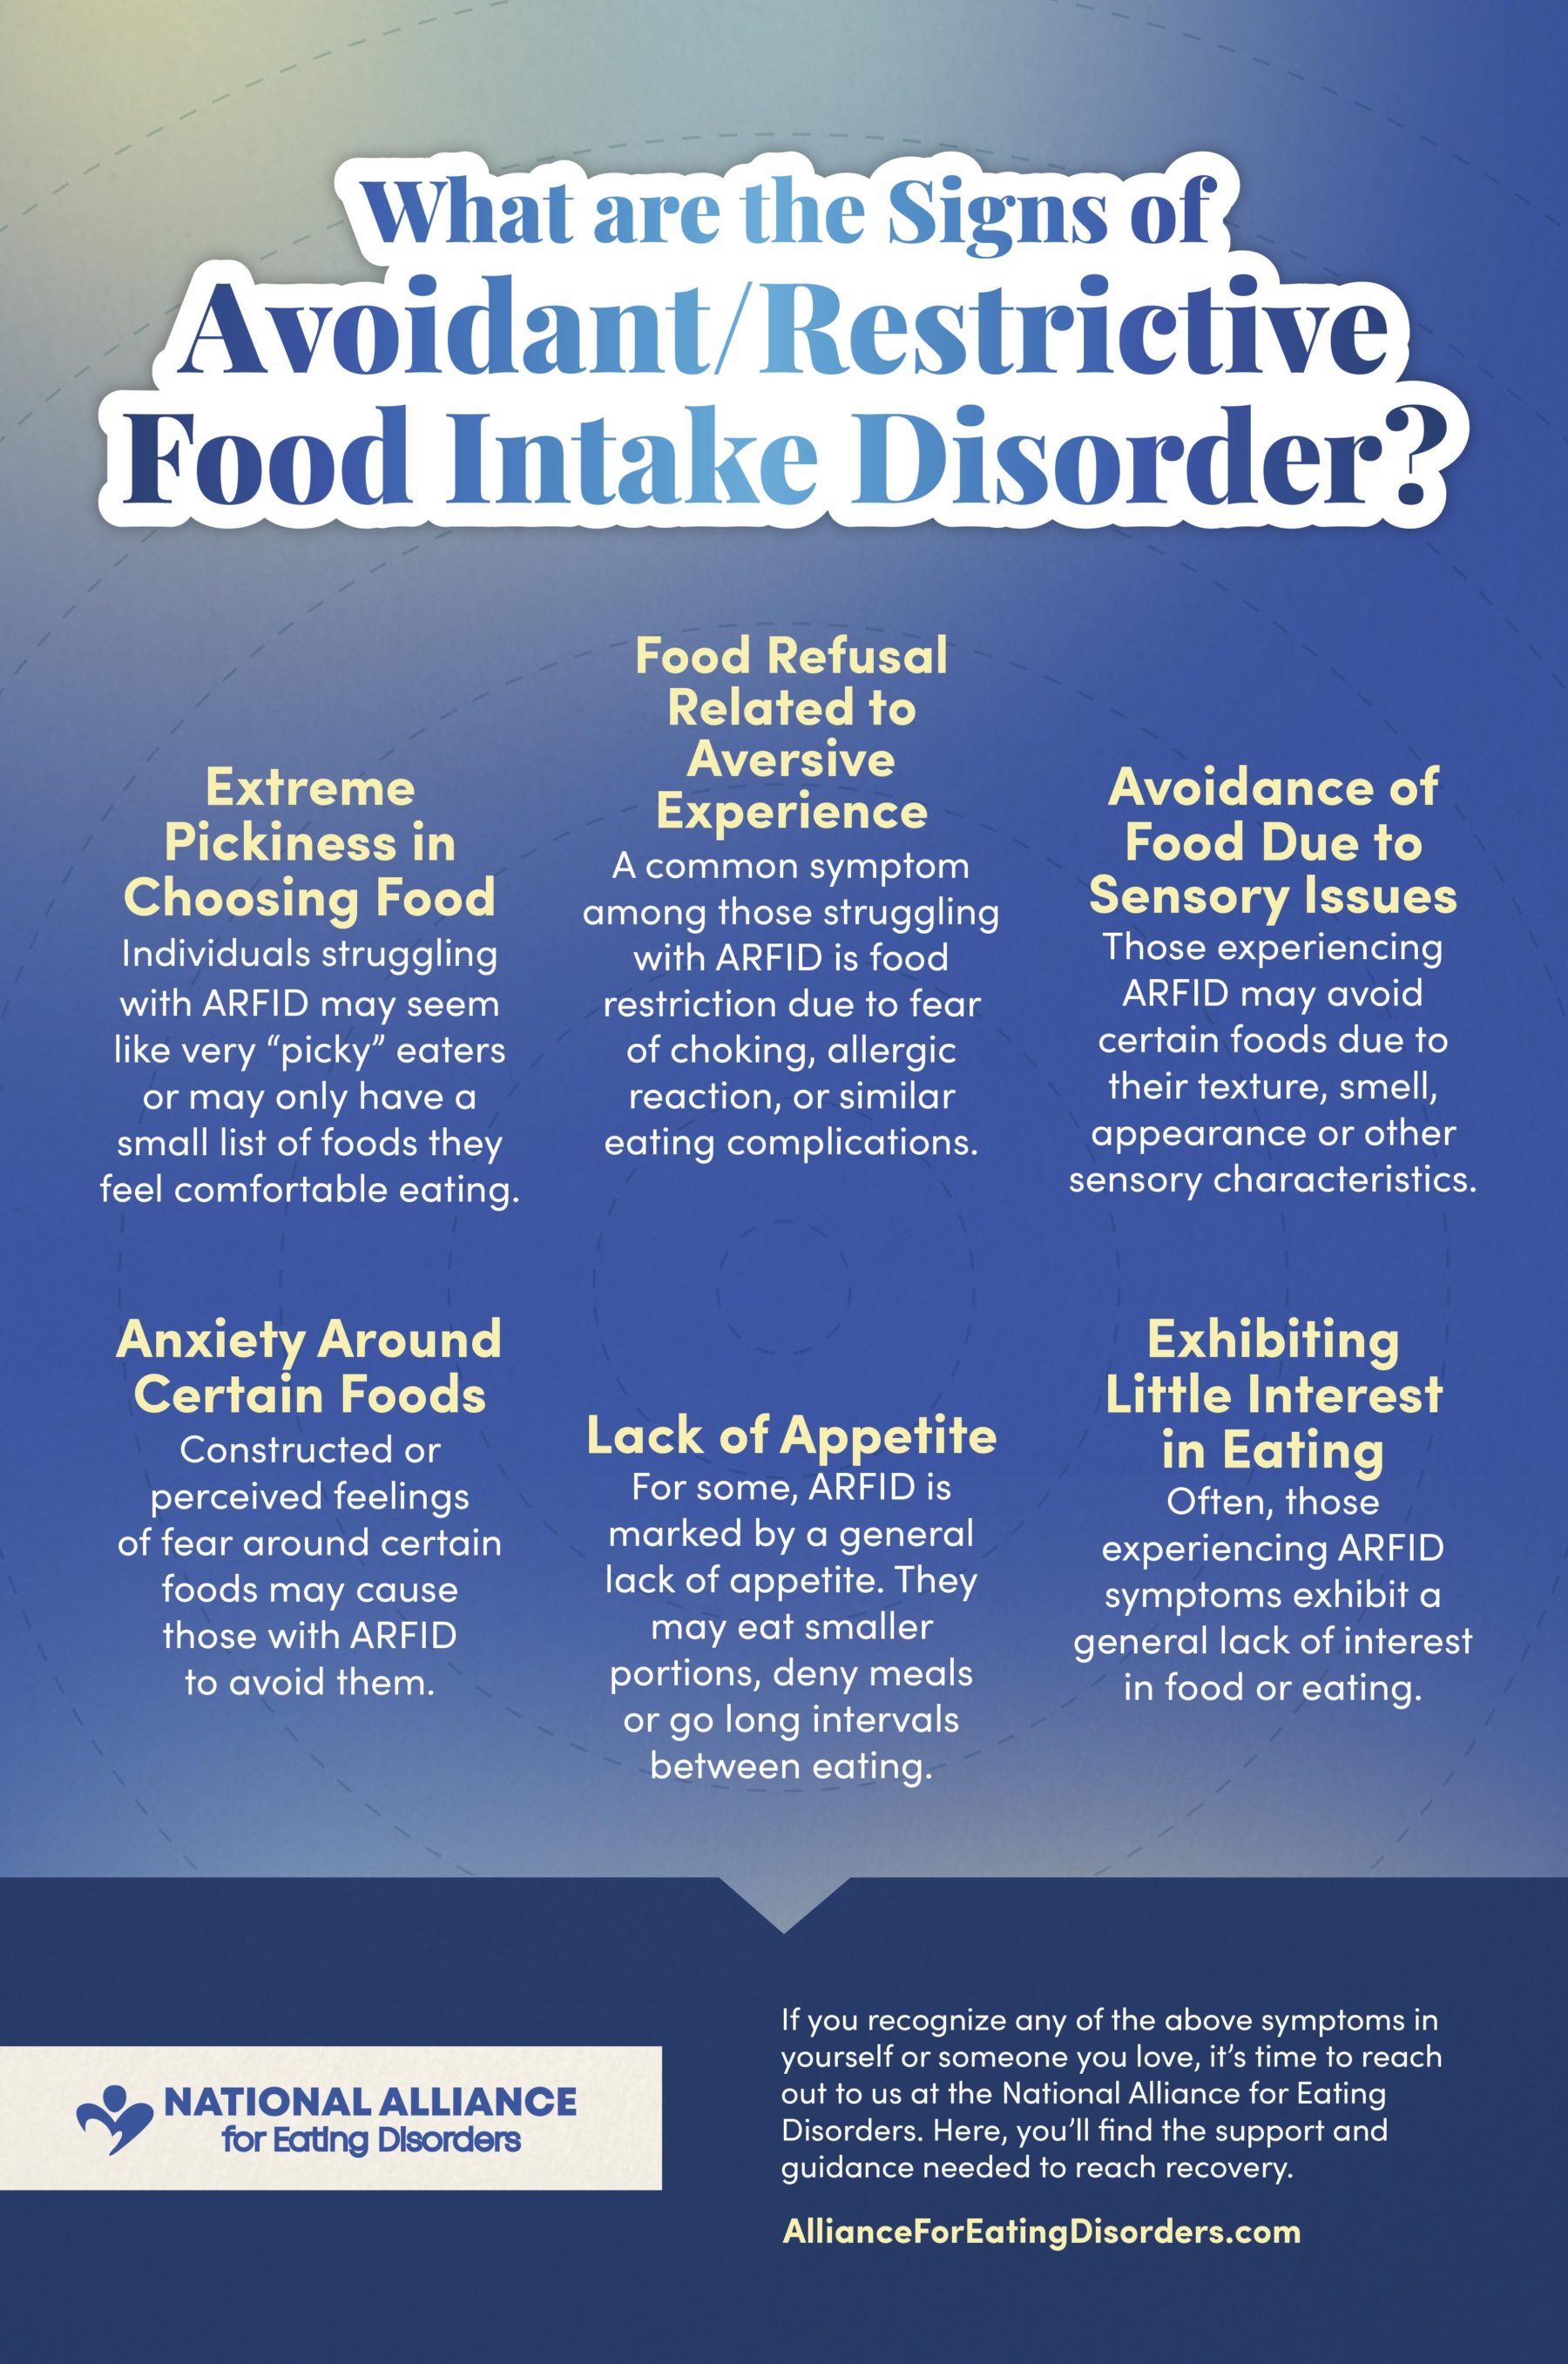 what are the signs and symptoms of aviodant restrictive food intake disorder (ARFID)?